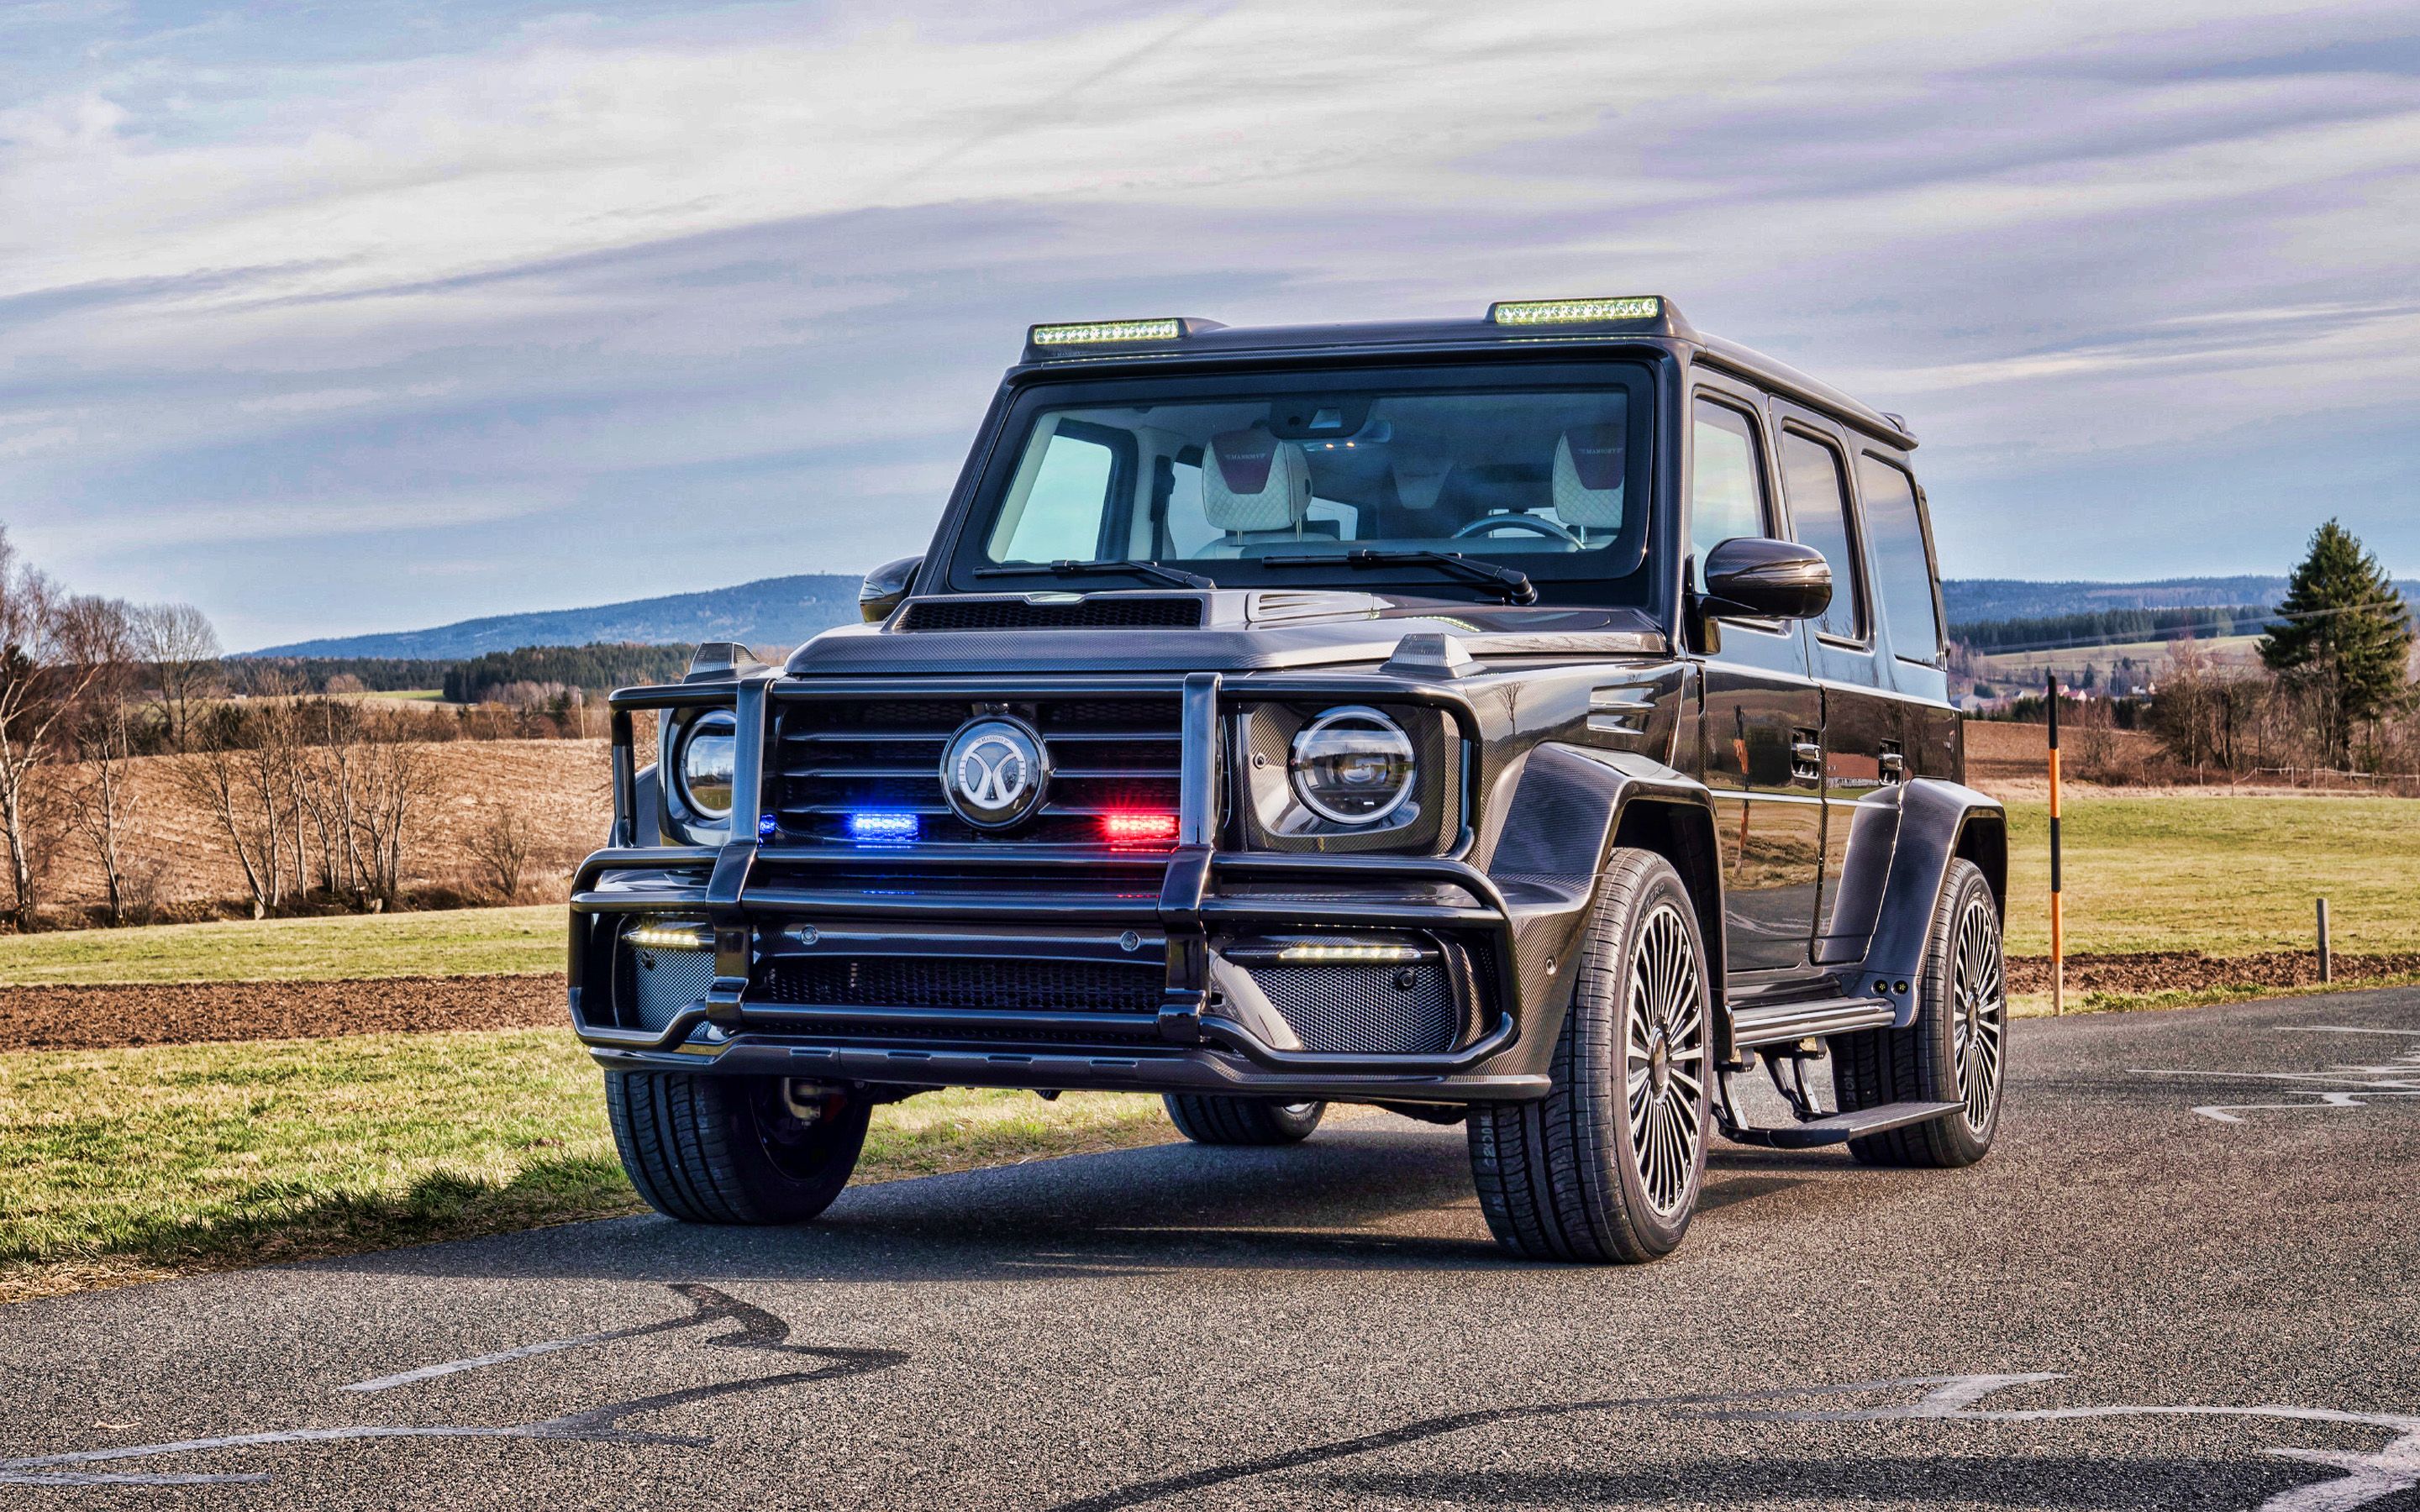 Download Wallpaper Mansory Mercedes AMG G63 Armored, 4k, Police Cars, 2020 Cars, BR Tuning, Mansory, Gelandewagen, Mercedes Benz G Class, Gray Gelandewagen, SUVs, Mercedes For Desktop With Resolution 2880x1800. High Quality HD Picture Wallpaper